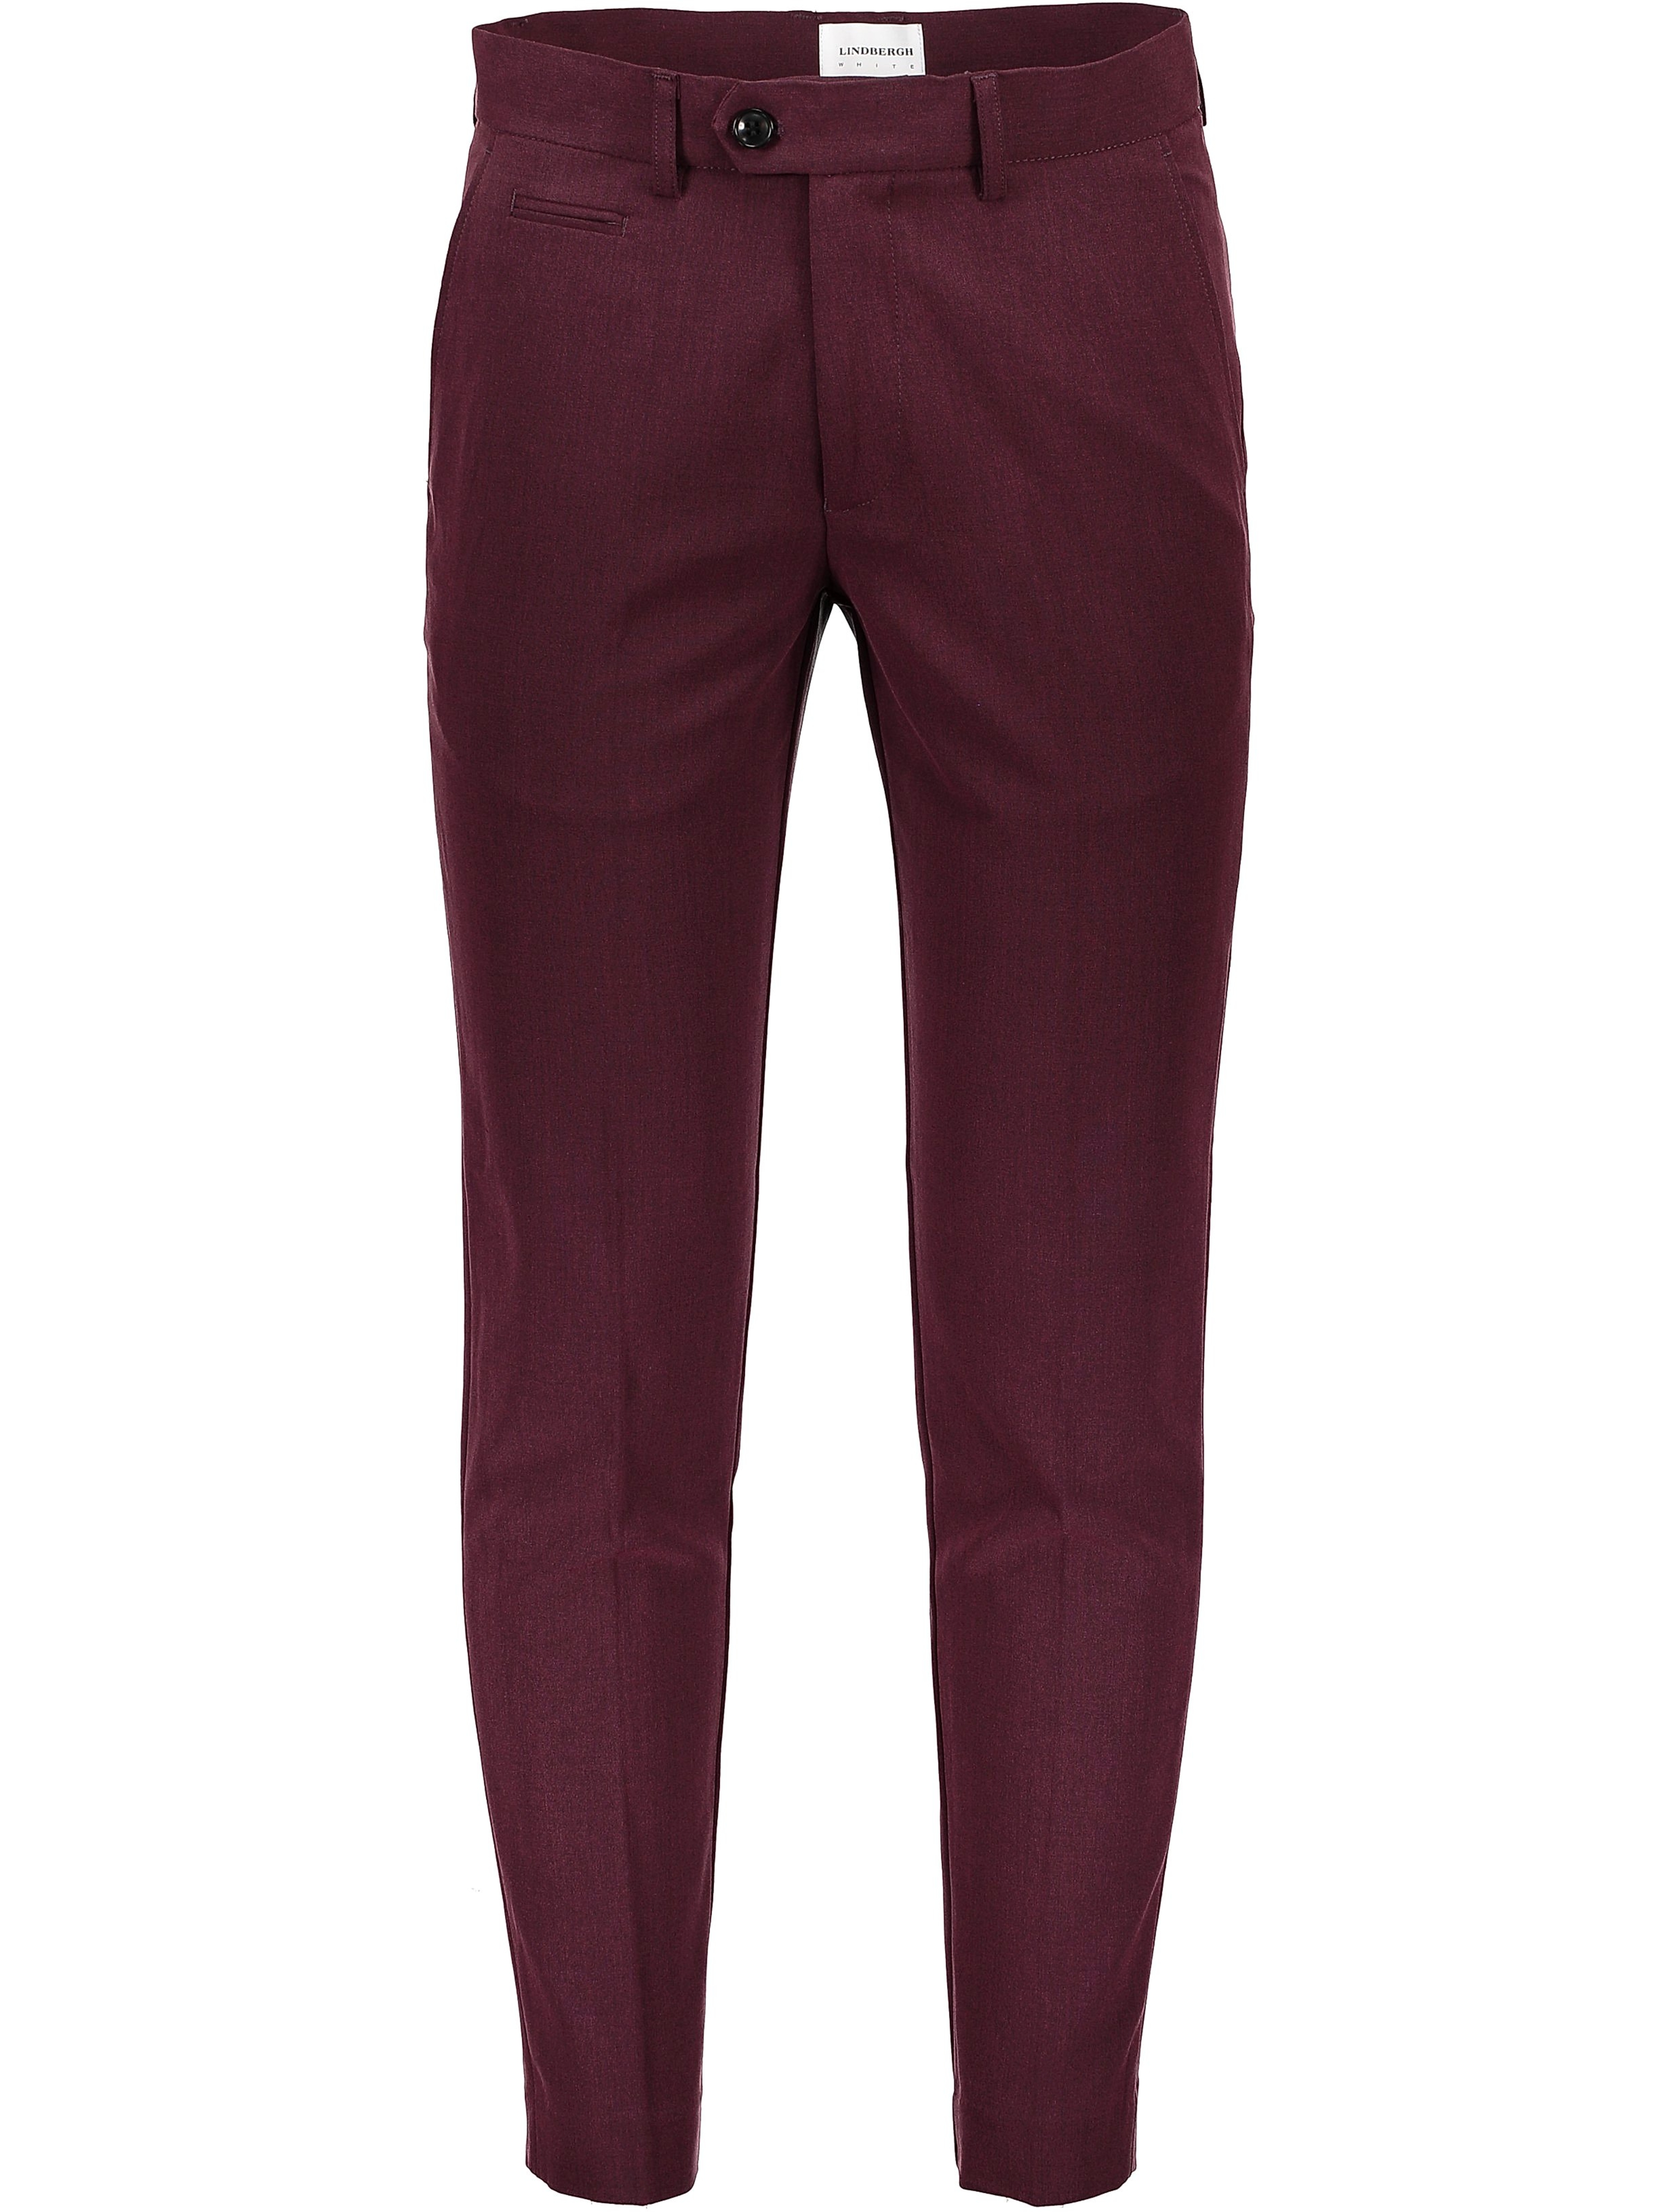 Lindbergh Performance pants red / dk red mix